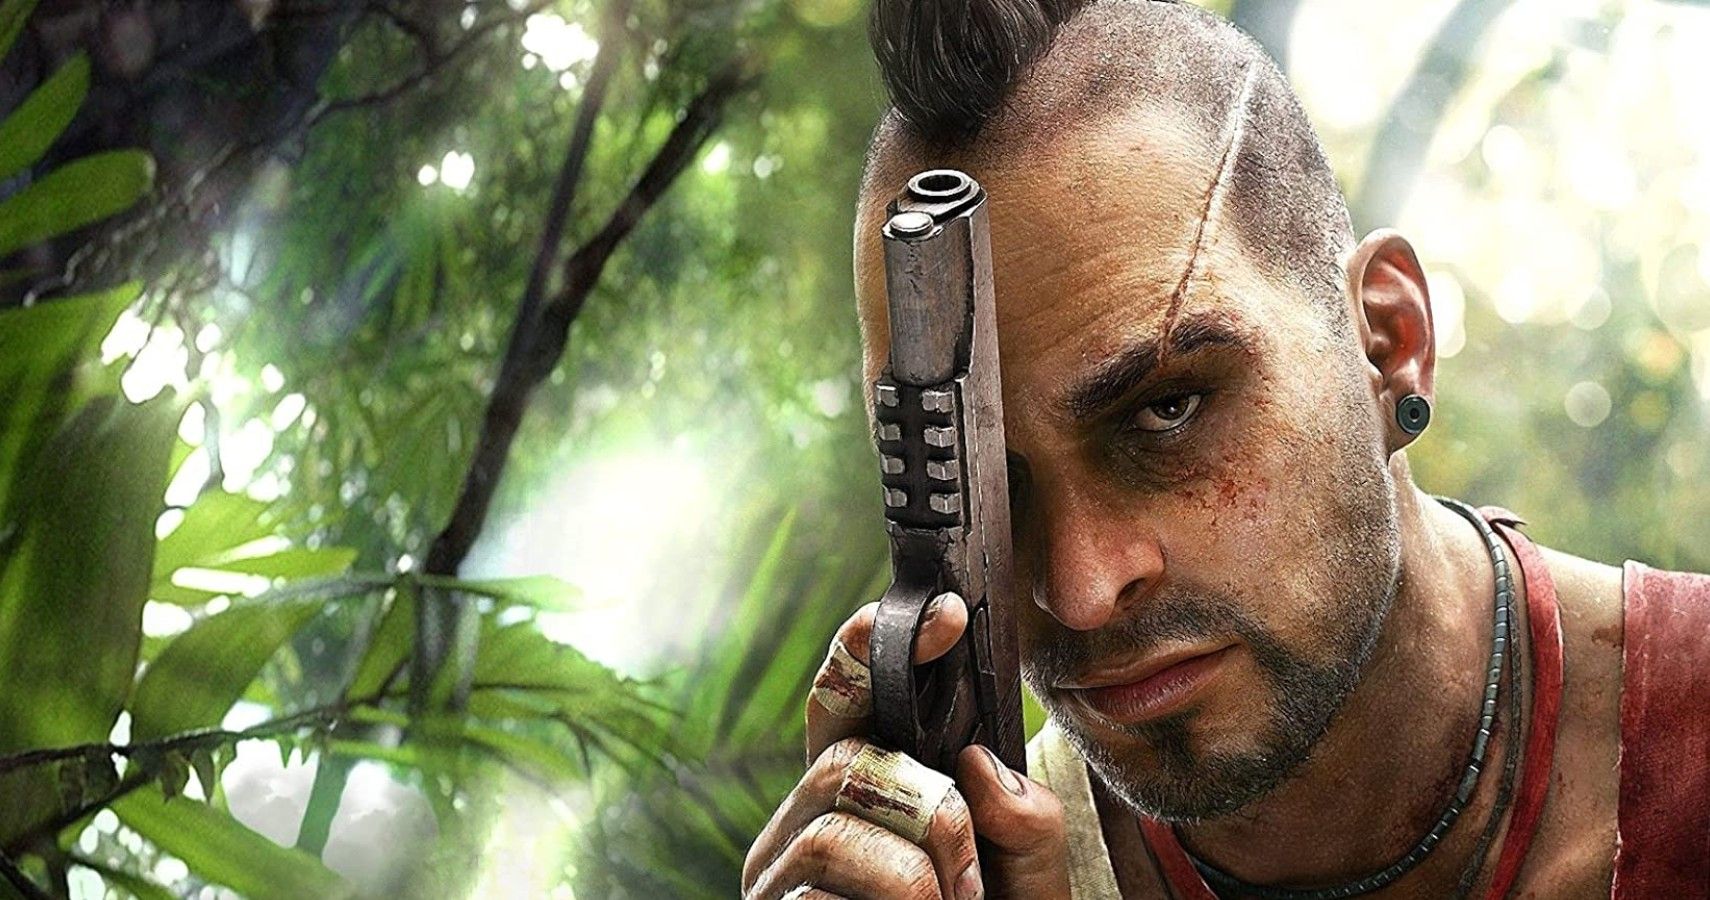 Vaas Montenegro in Far Cry 3